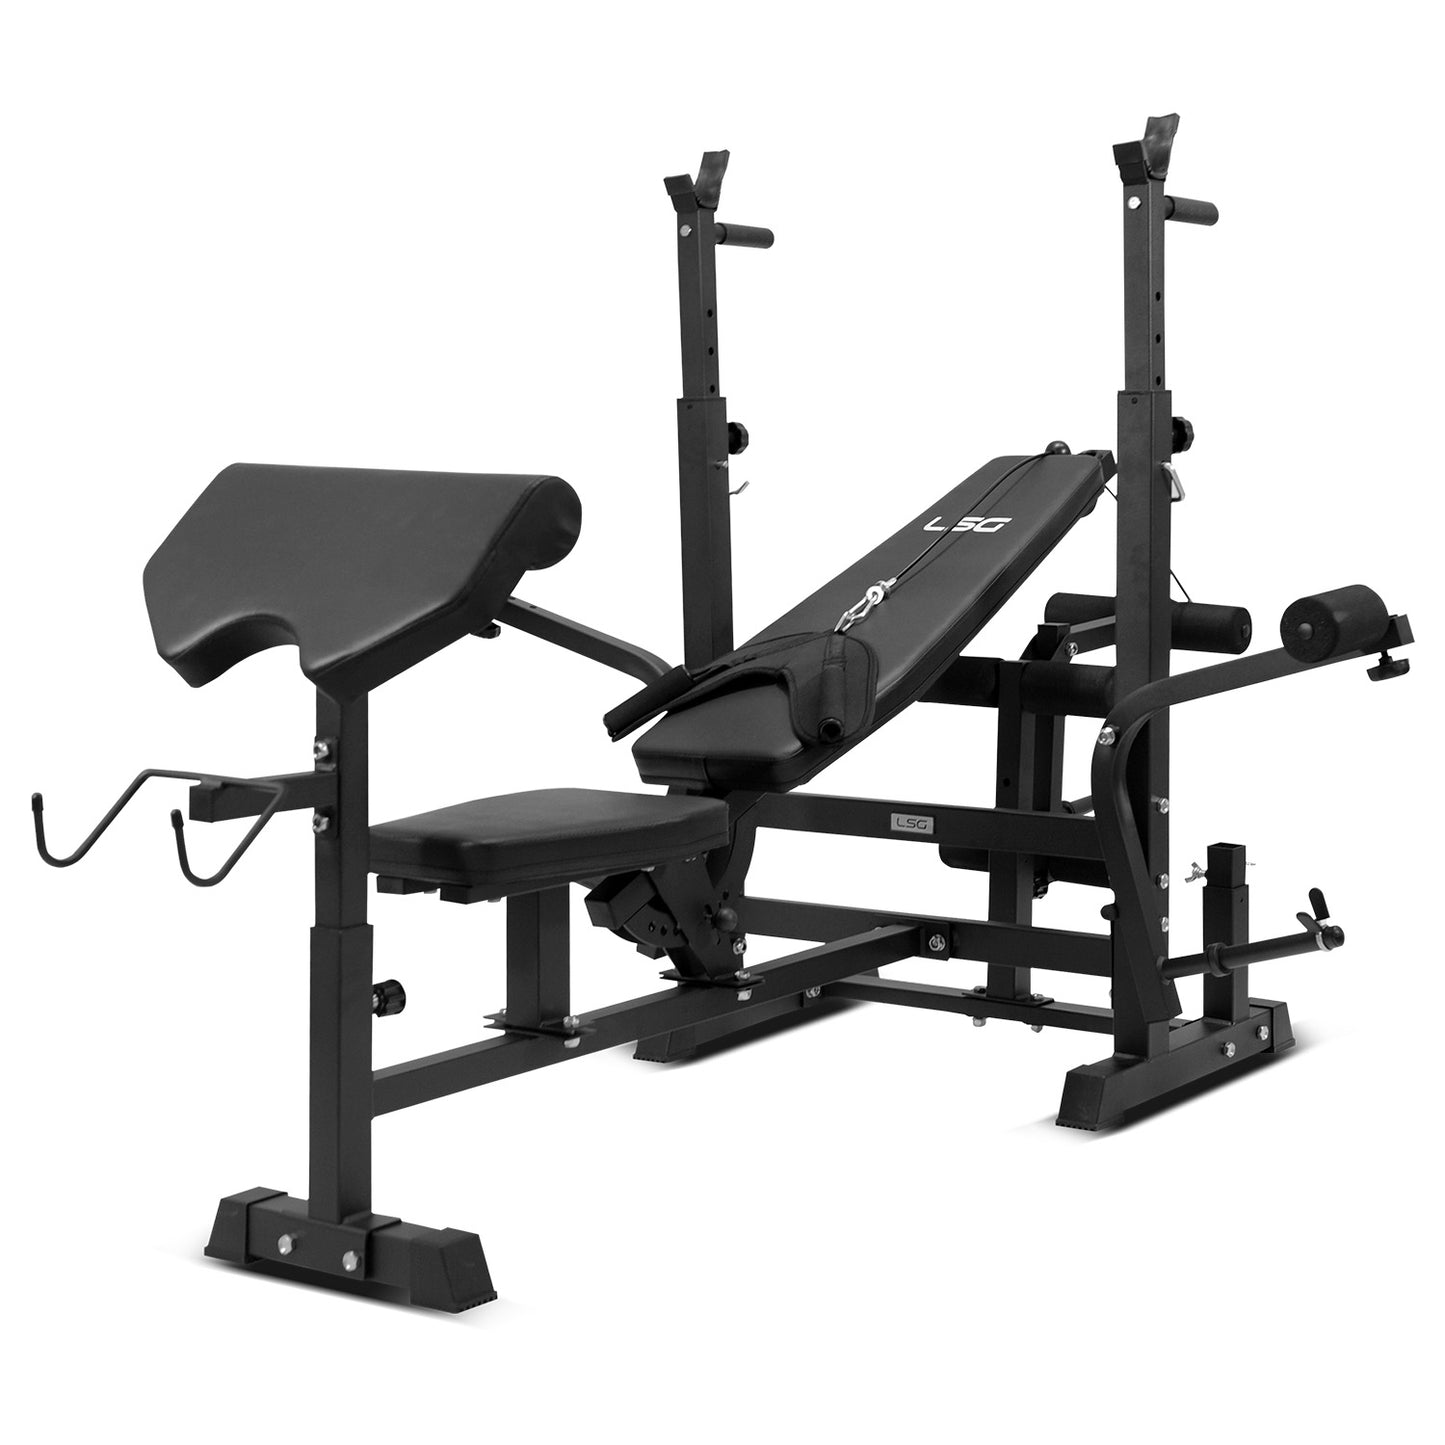 LSG GBN100 Multi Function Bench Press with 90kg Weight and Bar set